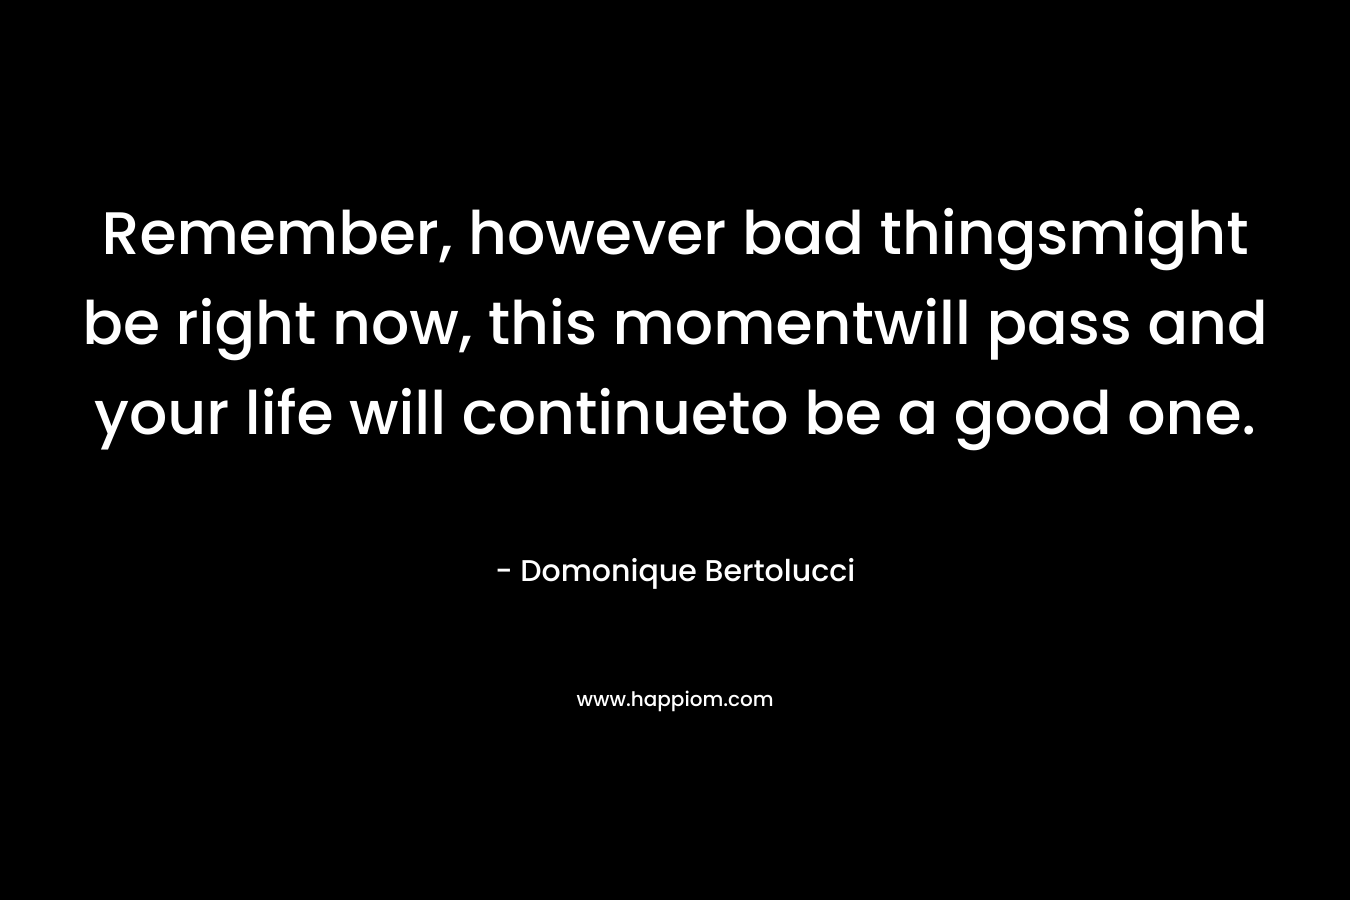 Remember, however bad thingsmight be right now, this momentwill pass and your life will continueto be a good one. – Domonique Bertolucci